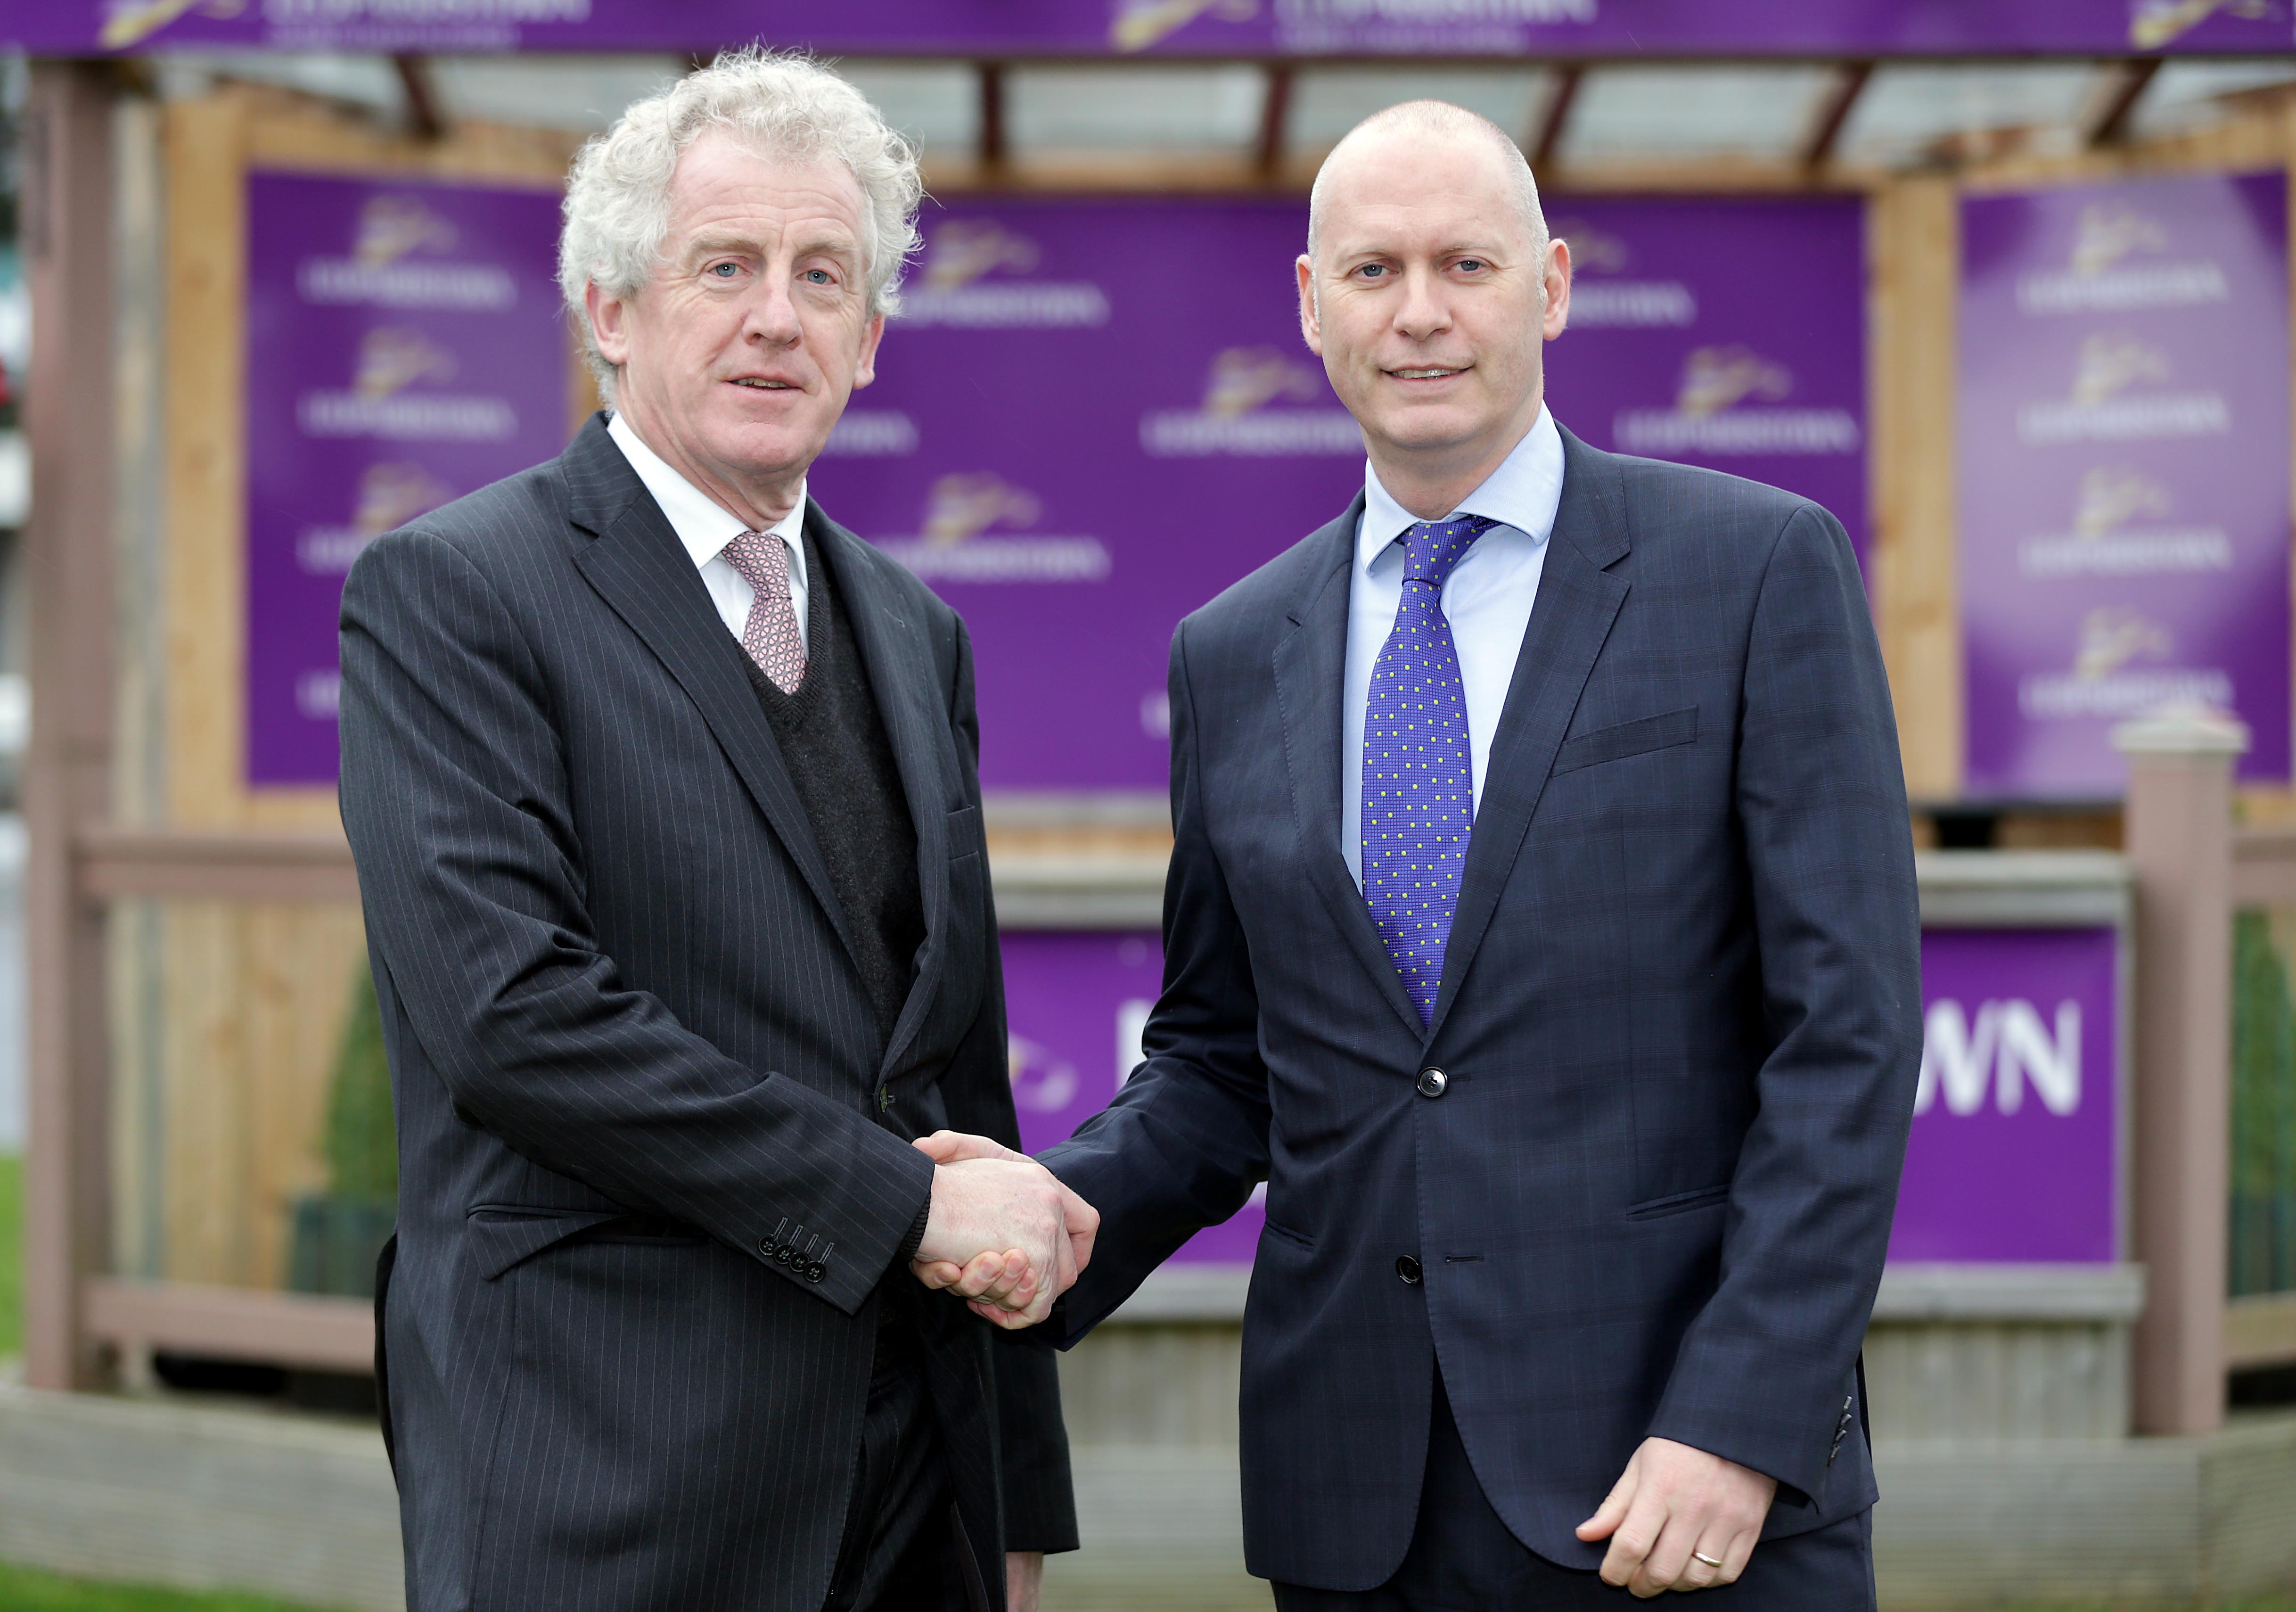 Pat Keogh, CEO, Leopardstown Racecourse and John Rooney, managing director, Flogas Ireland, at the sponsorship announcement